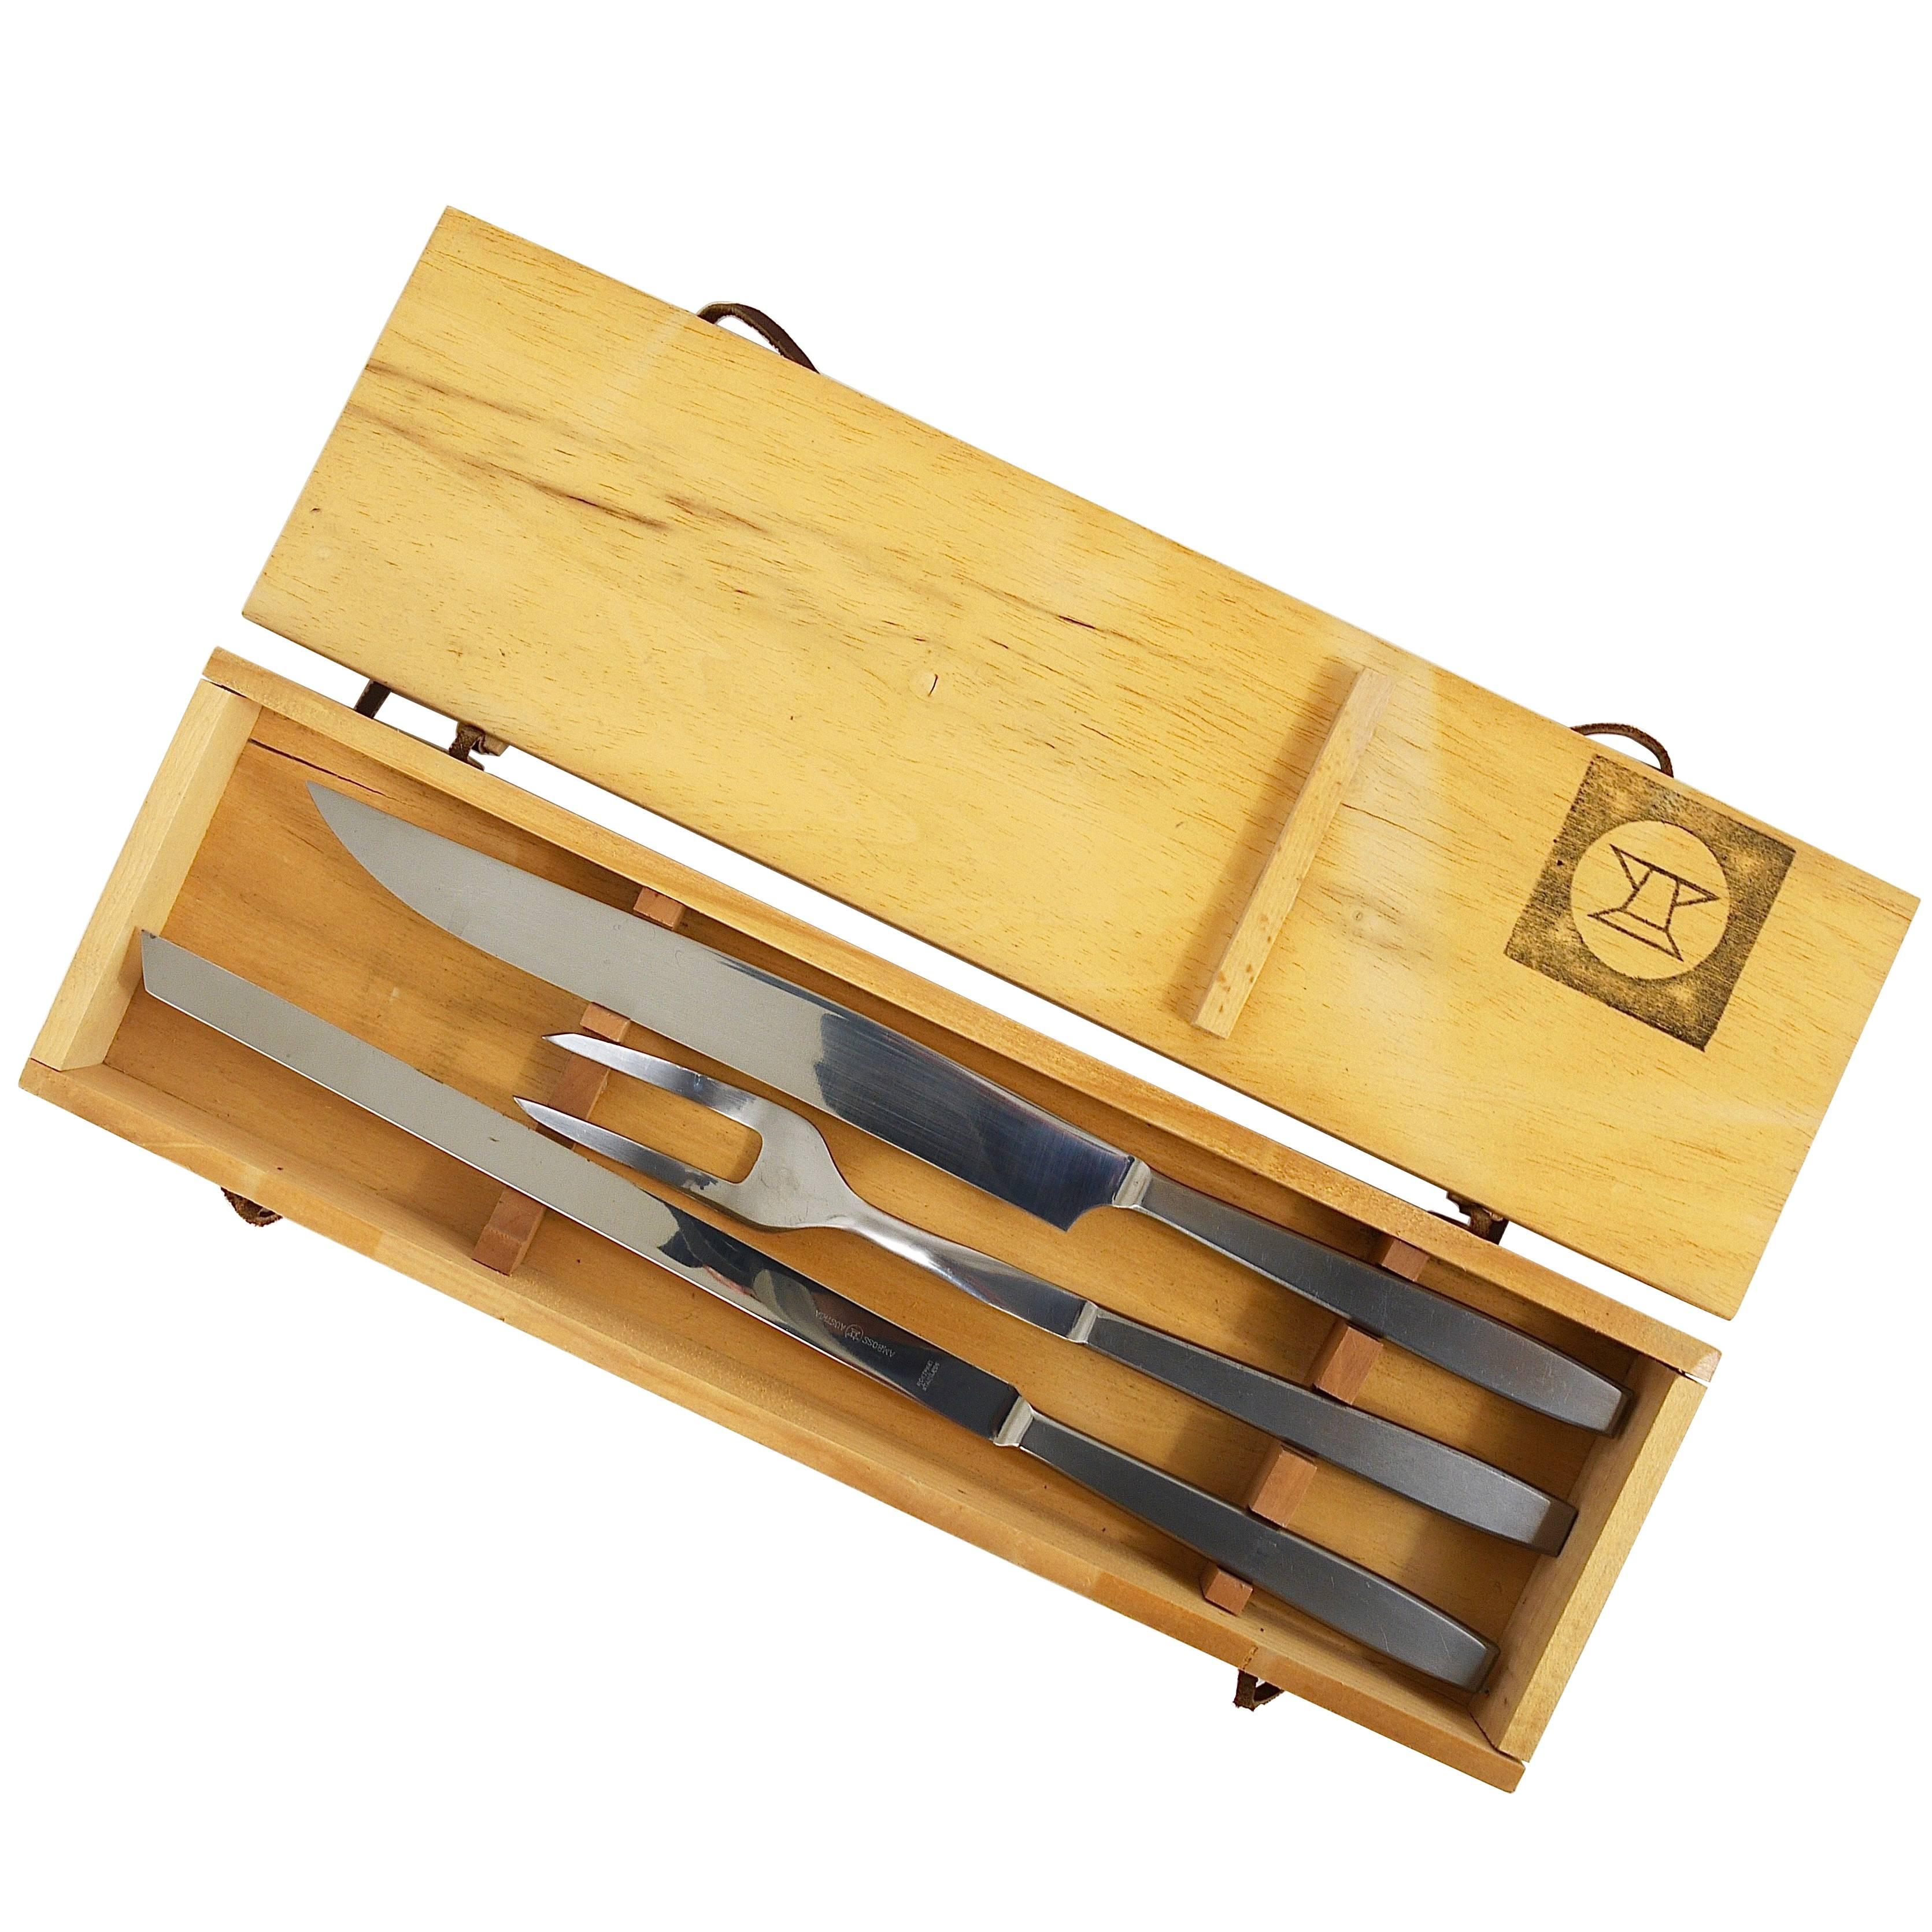 Boxed Amboss 2050 Carving Knives and Fork by Helmut Alder, Austria, 1950s